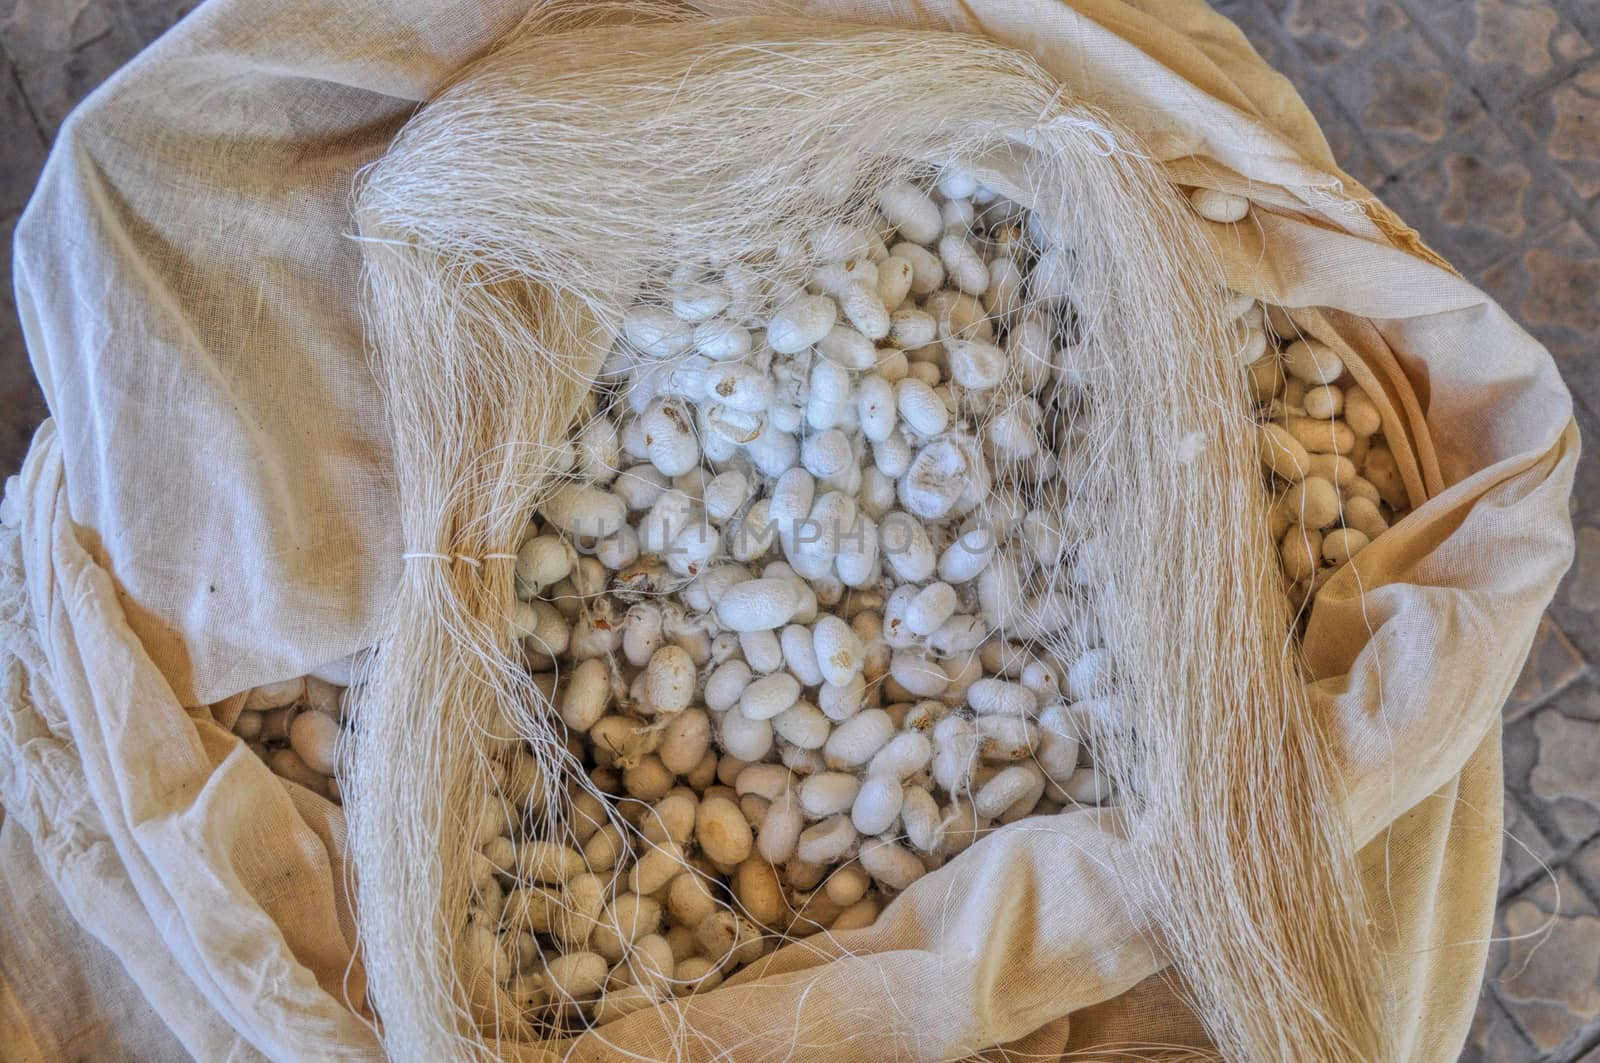 Bag full of cocoons used for silk production in Uzbekistan